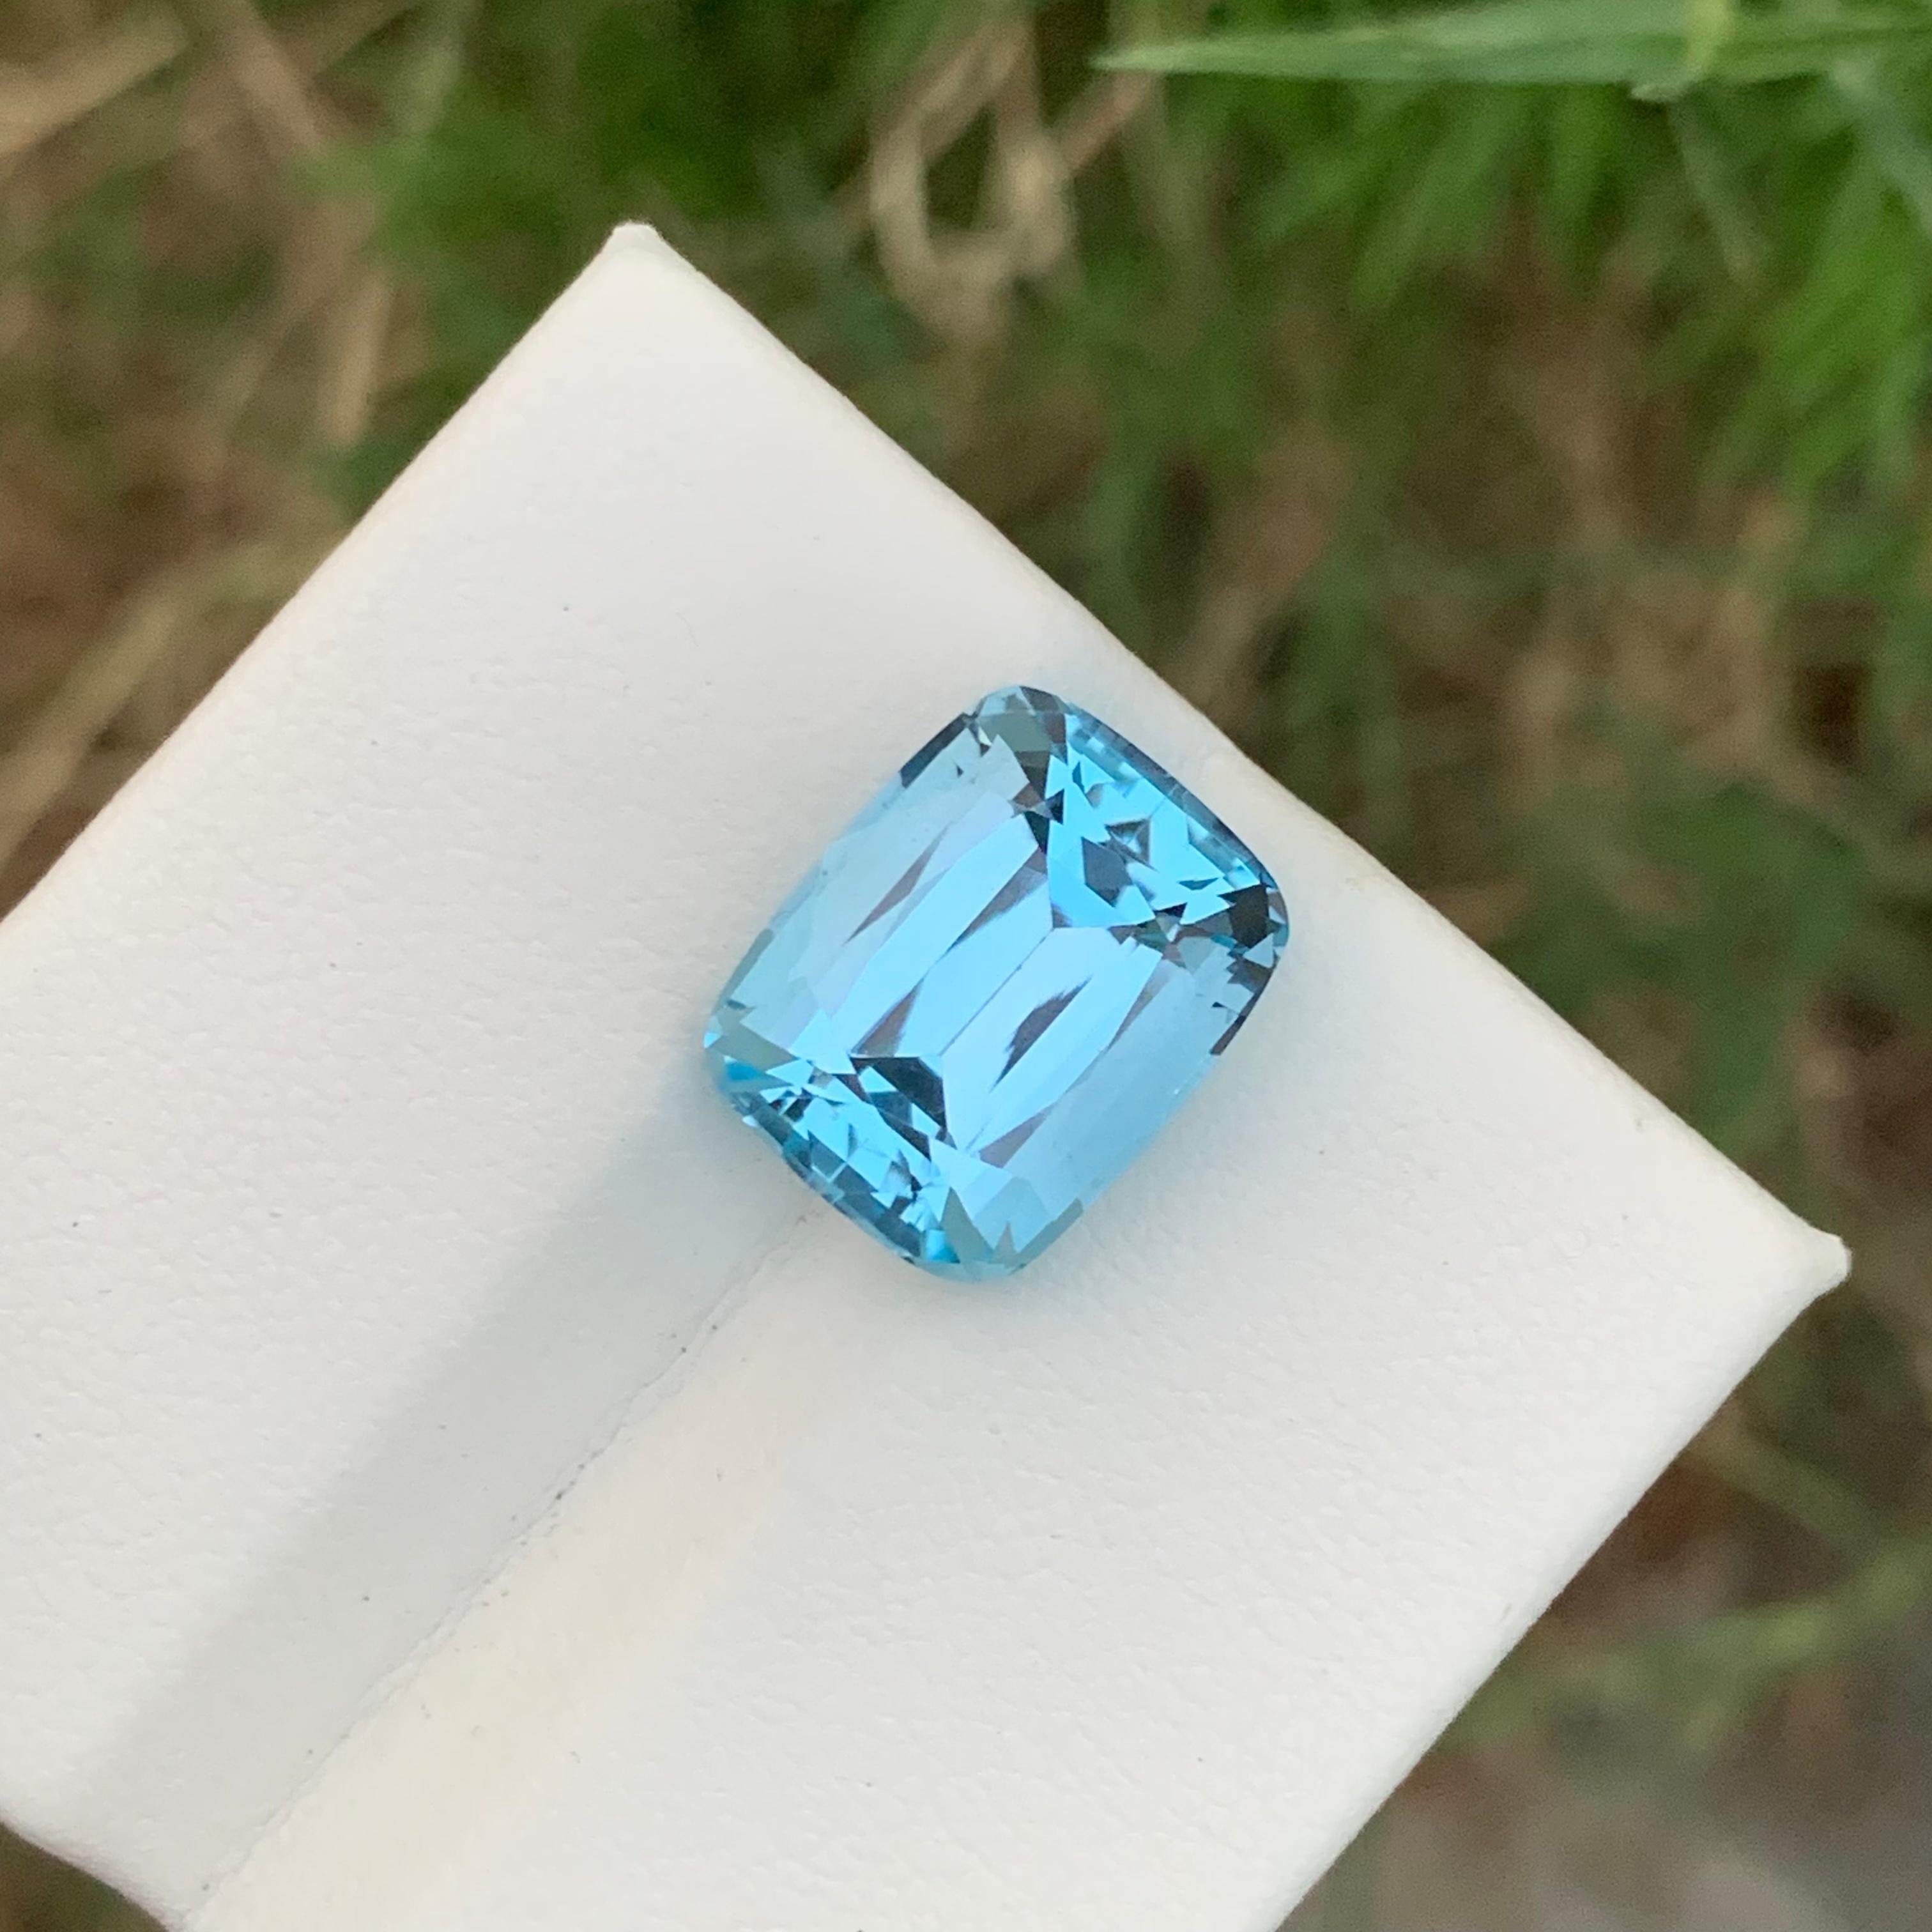 Loose Blue Topaz 
Weight: 12.0 Carats 
Dimension: 14.3x11.5x9.1 Mm
Origin: Brazil
Color: Sky Blue
Shape: Cushion 
Certificate: On Customer Demand 
.
The sky blue topaz is a stunning gemstone known for its enchanting hue reminiscent of a clear,